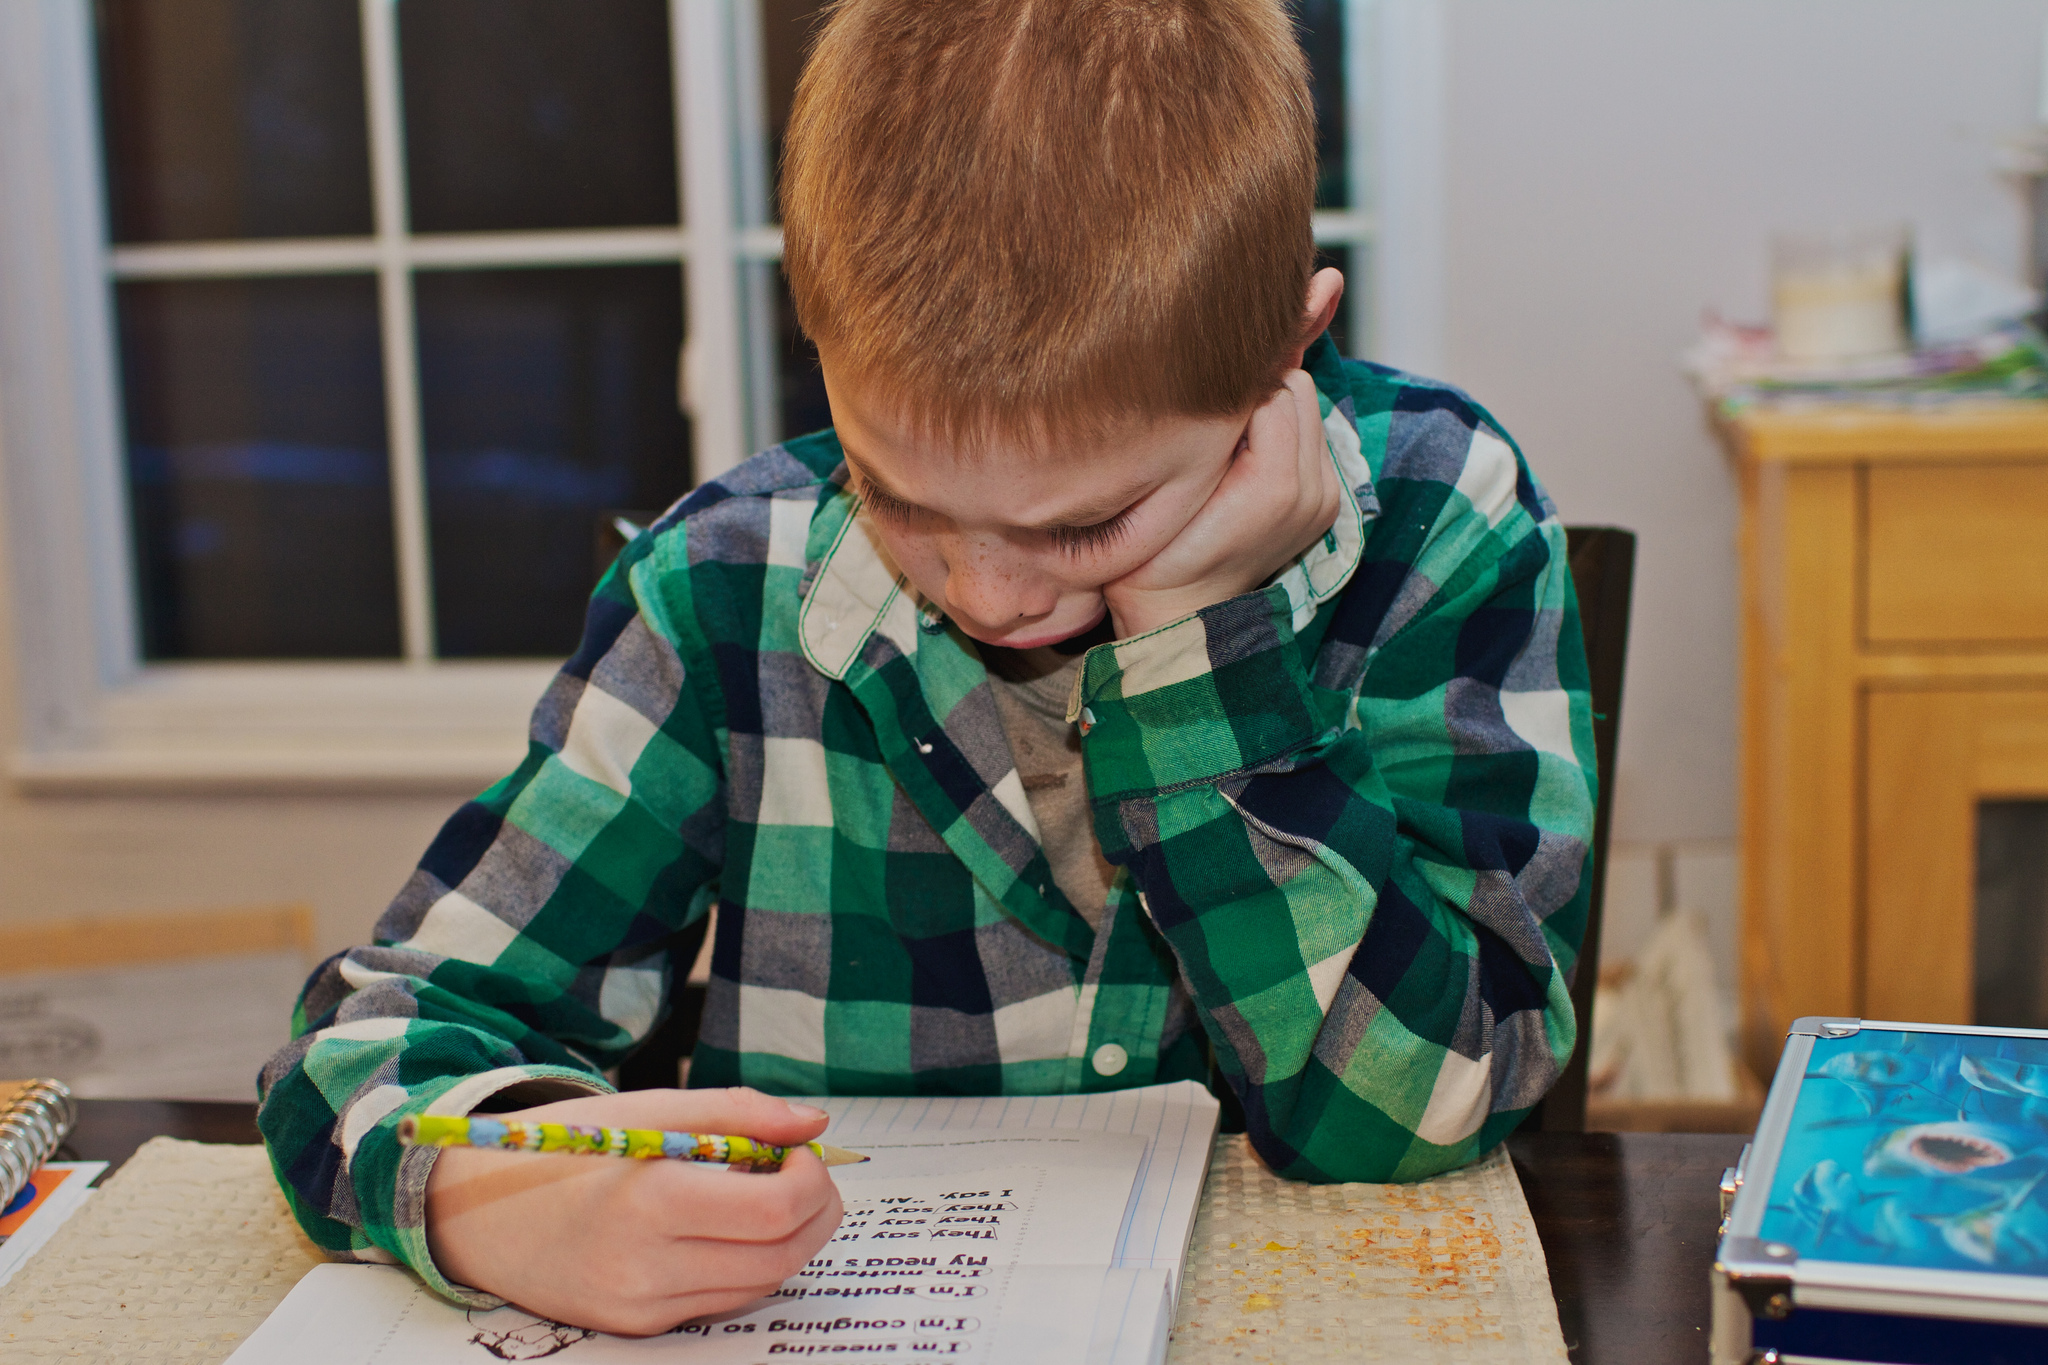 How to Help Your Children With Homework Without Doing It for Them